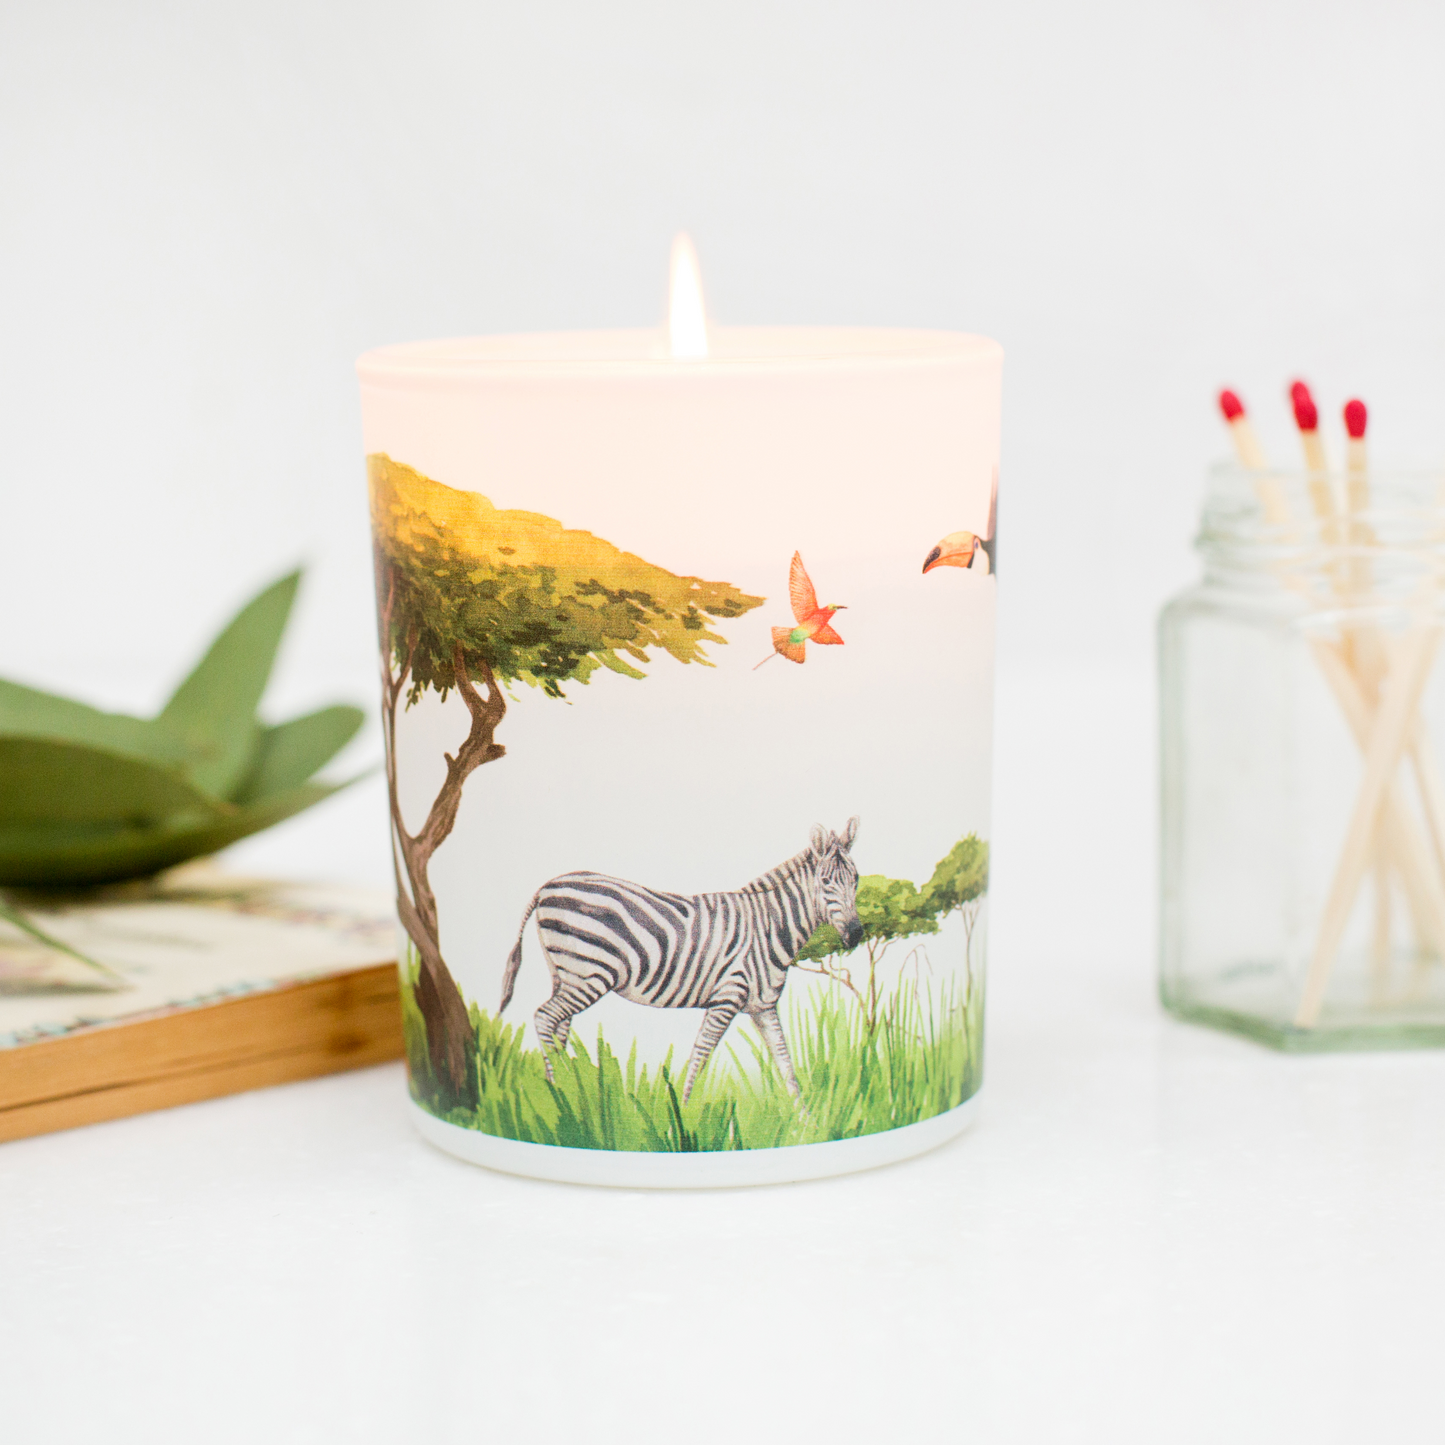 Save The Planet Scented Soy Wax Candle: Uplifting Grassland